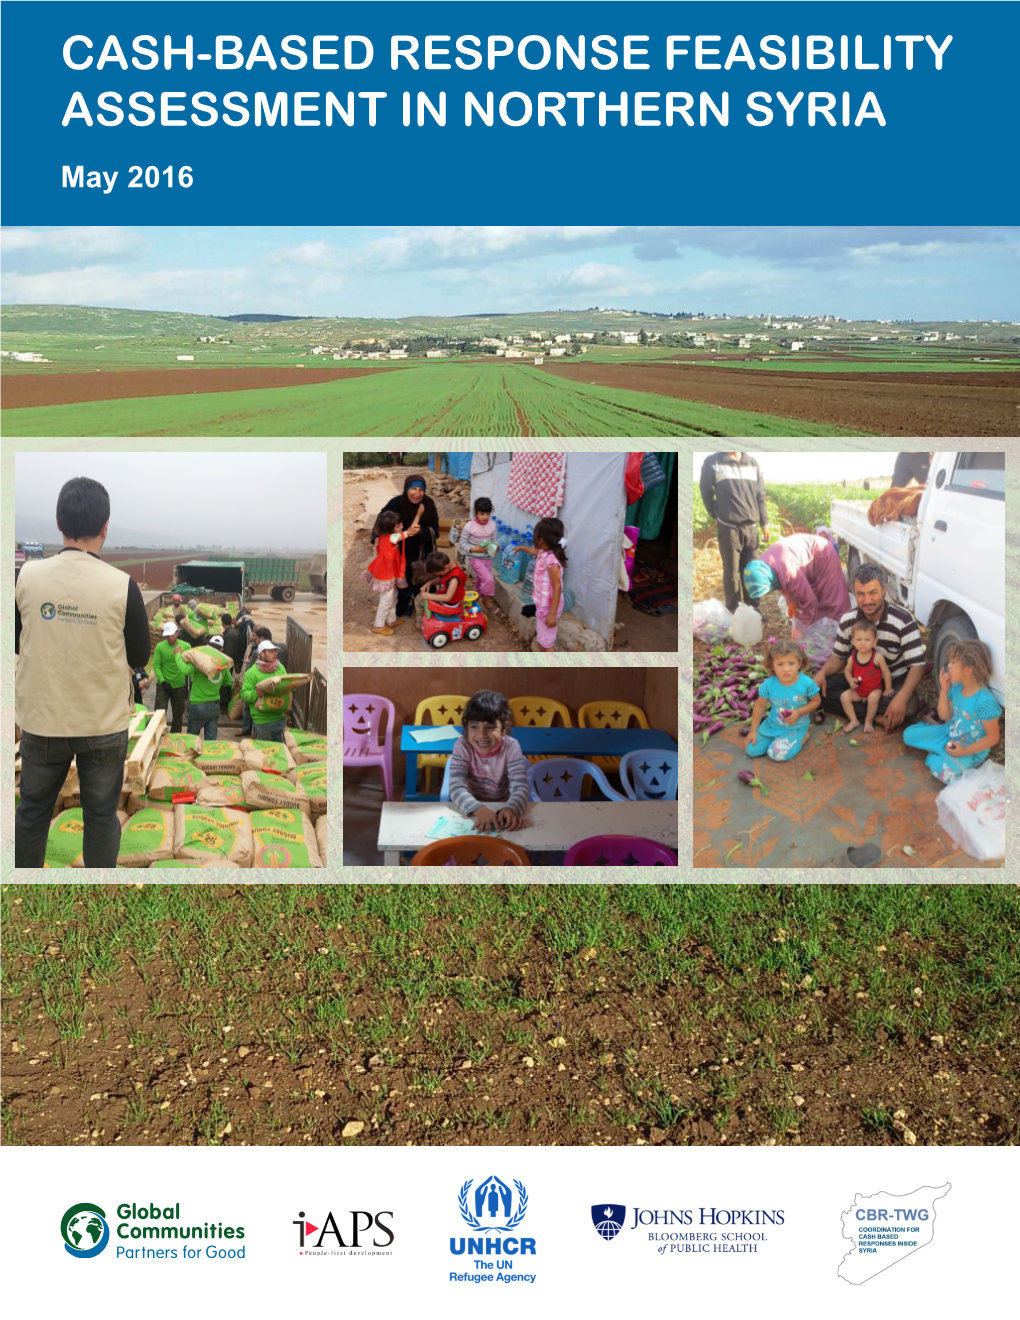 Cash-Based Response Feasibility Assessment in Northern Syria